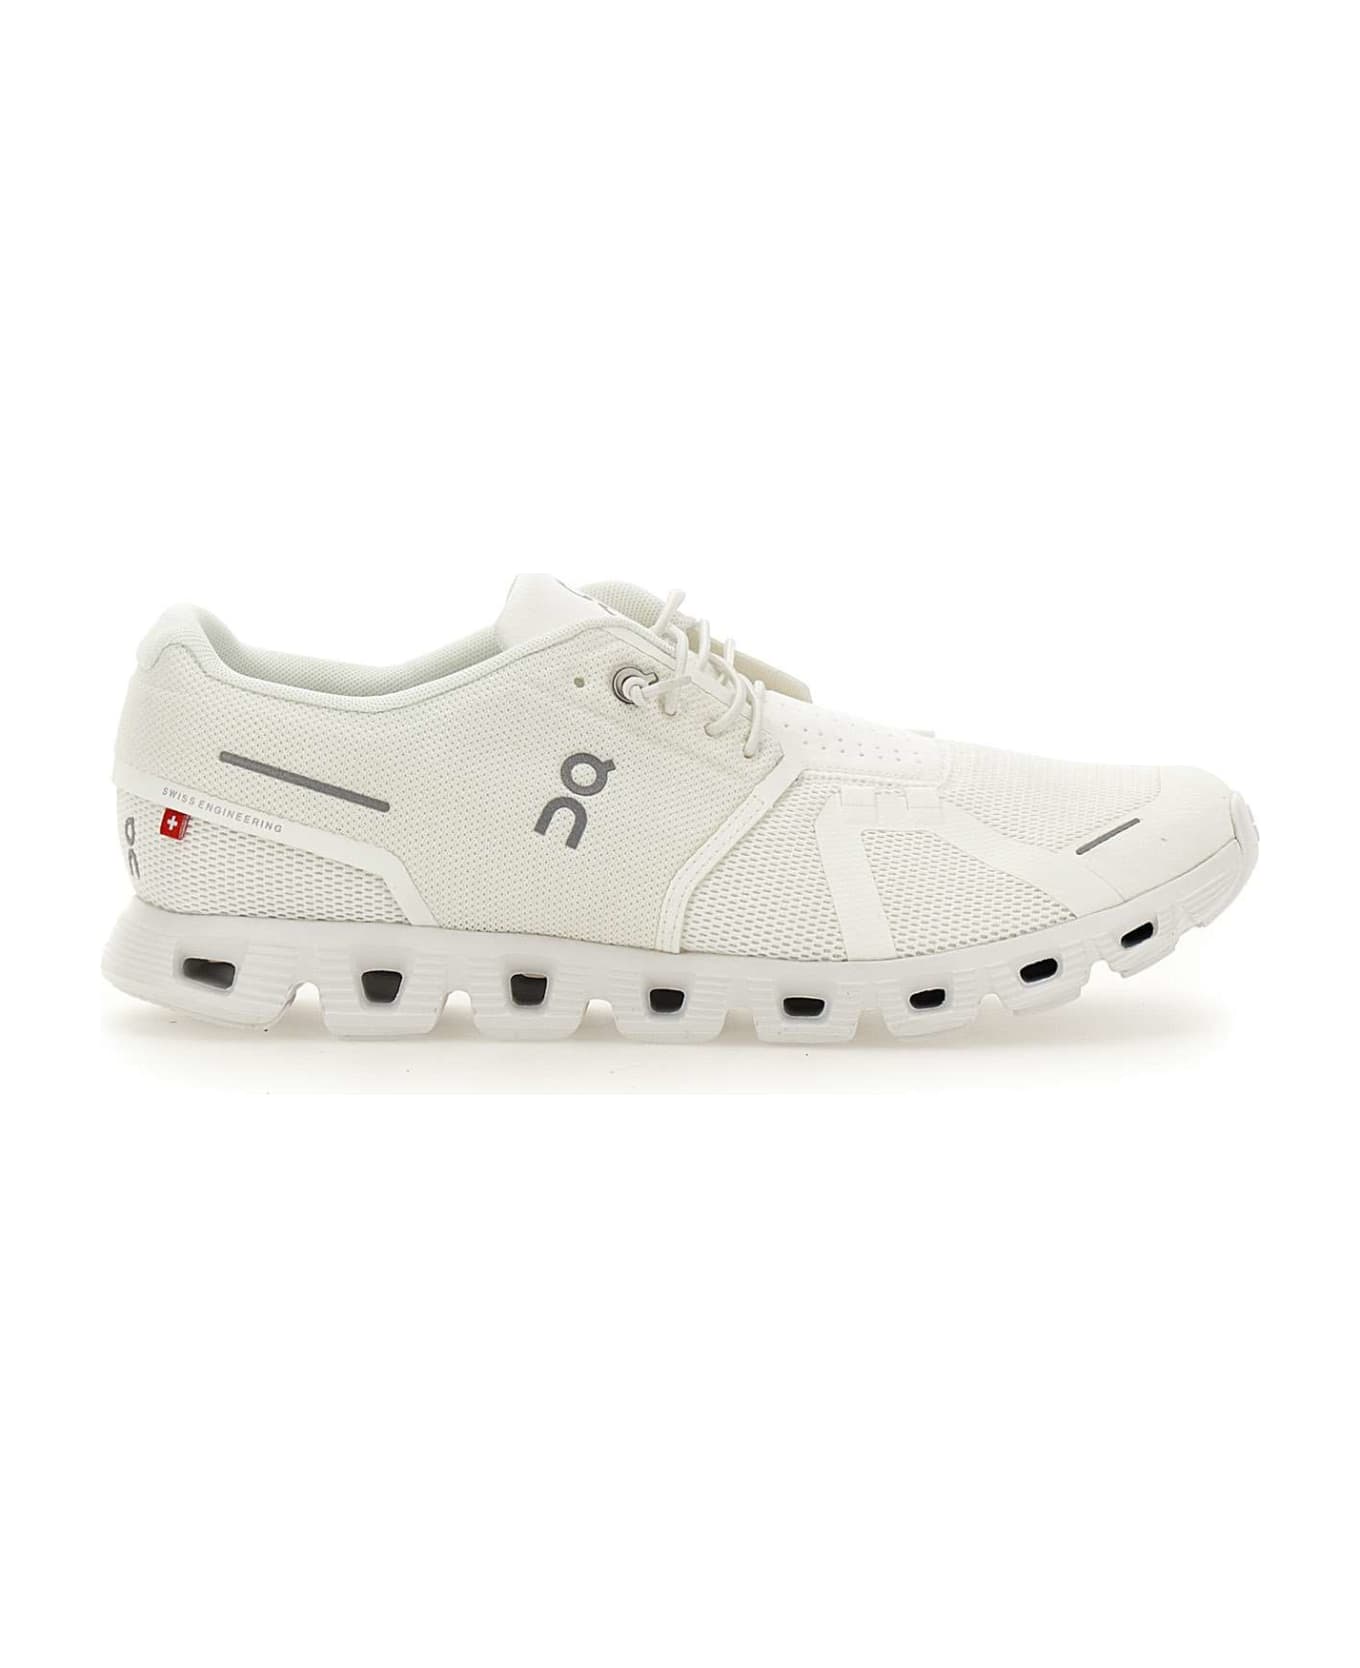 ON "cloud 5" Sneakers - WHITE スニーカー